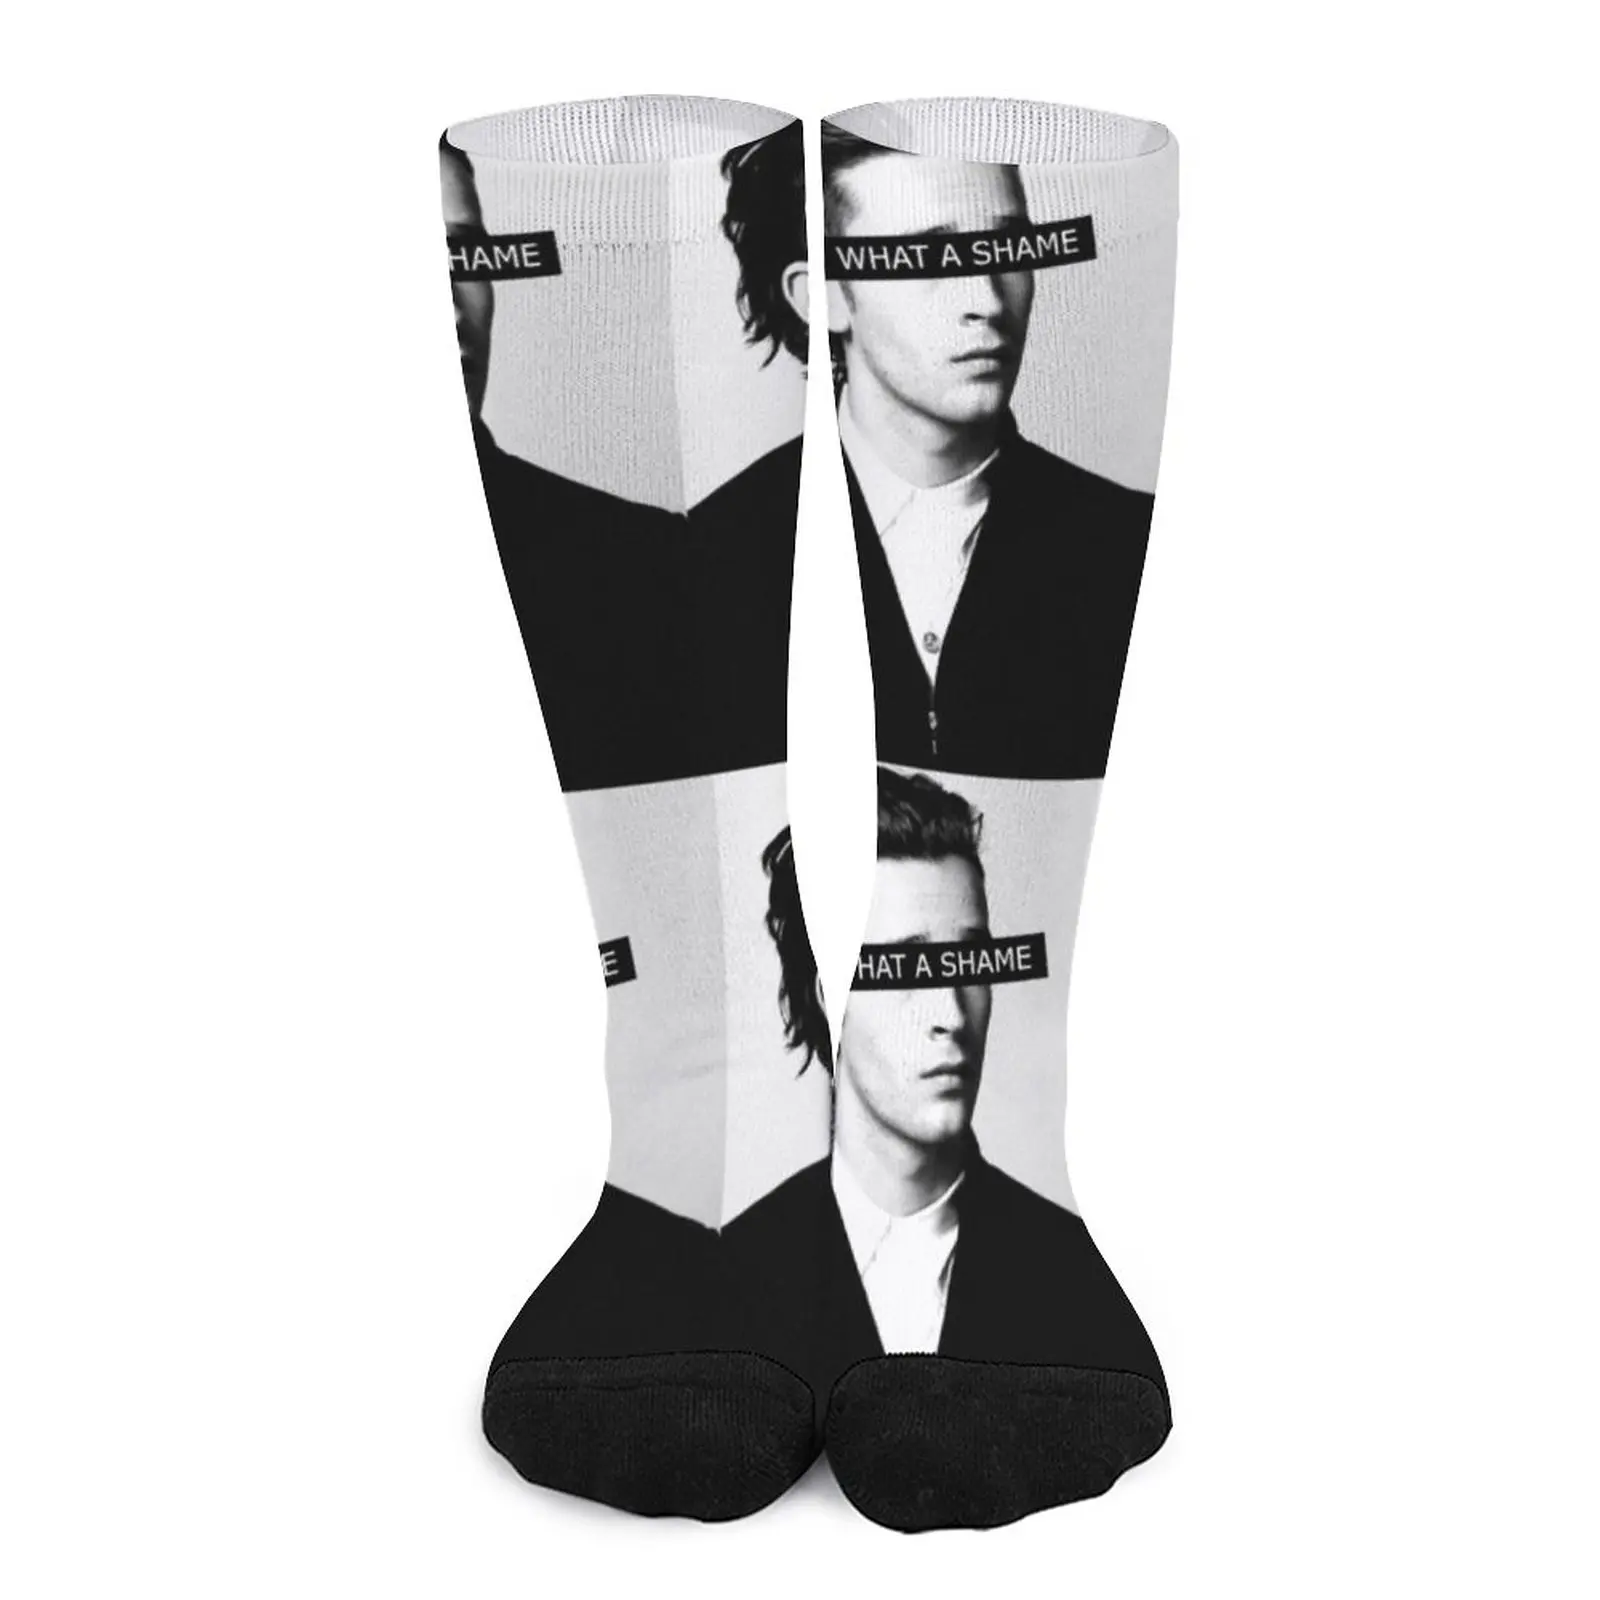 WHAT A SHAME - Matty Healy of The 1975 Socks happy socks Wholesale kinison what are you listening to 1 cd